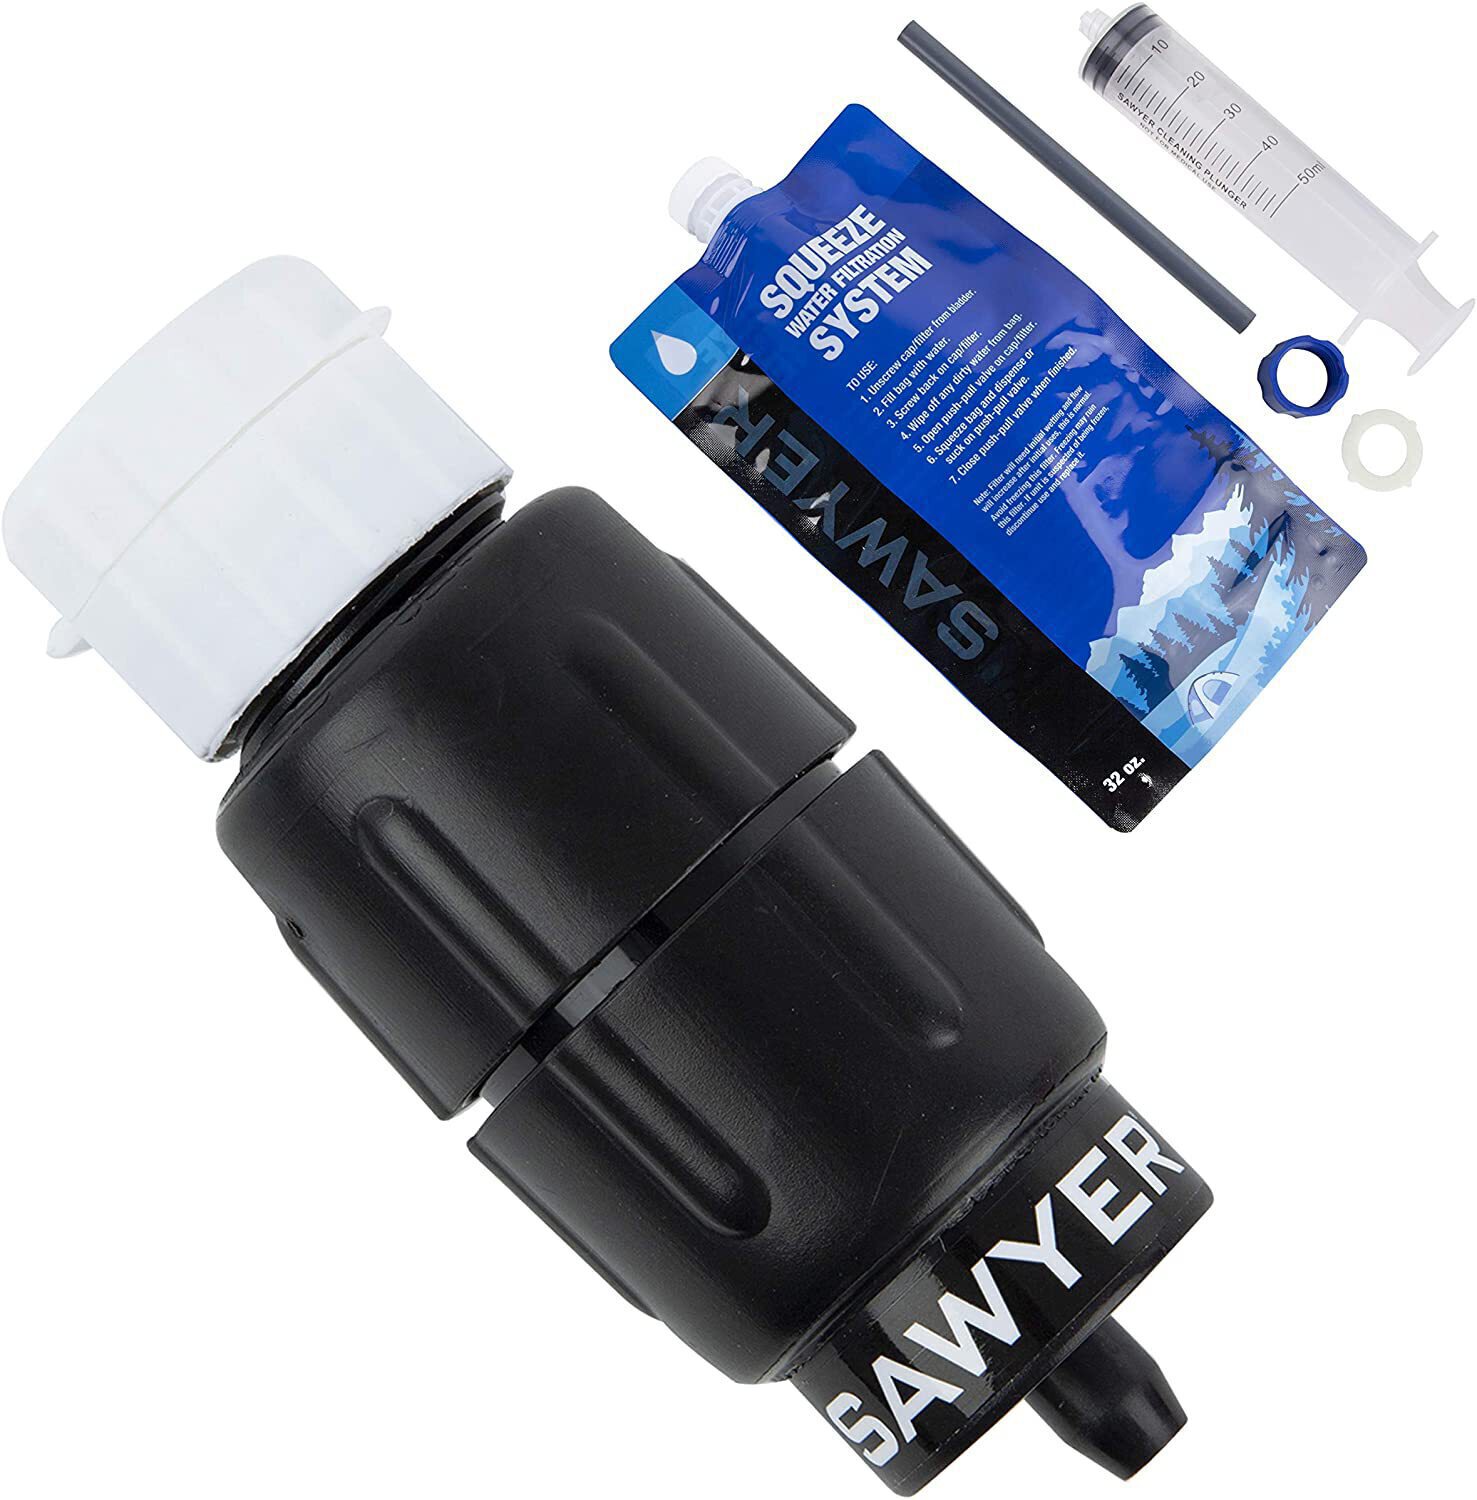 Sawyer Micro Squeeze Water Filtration